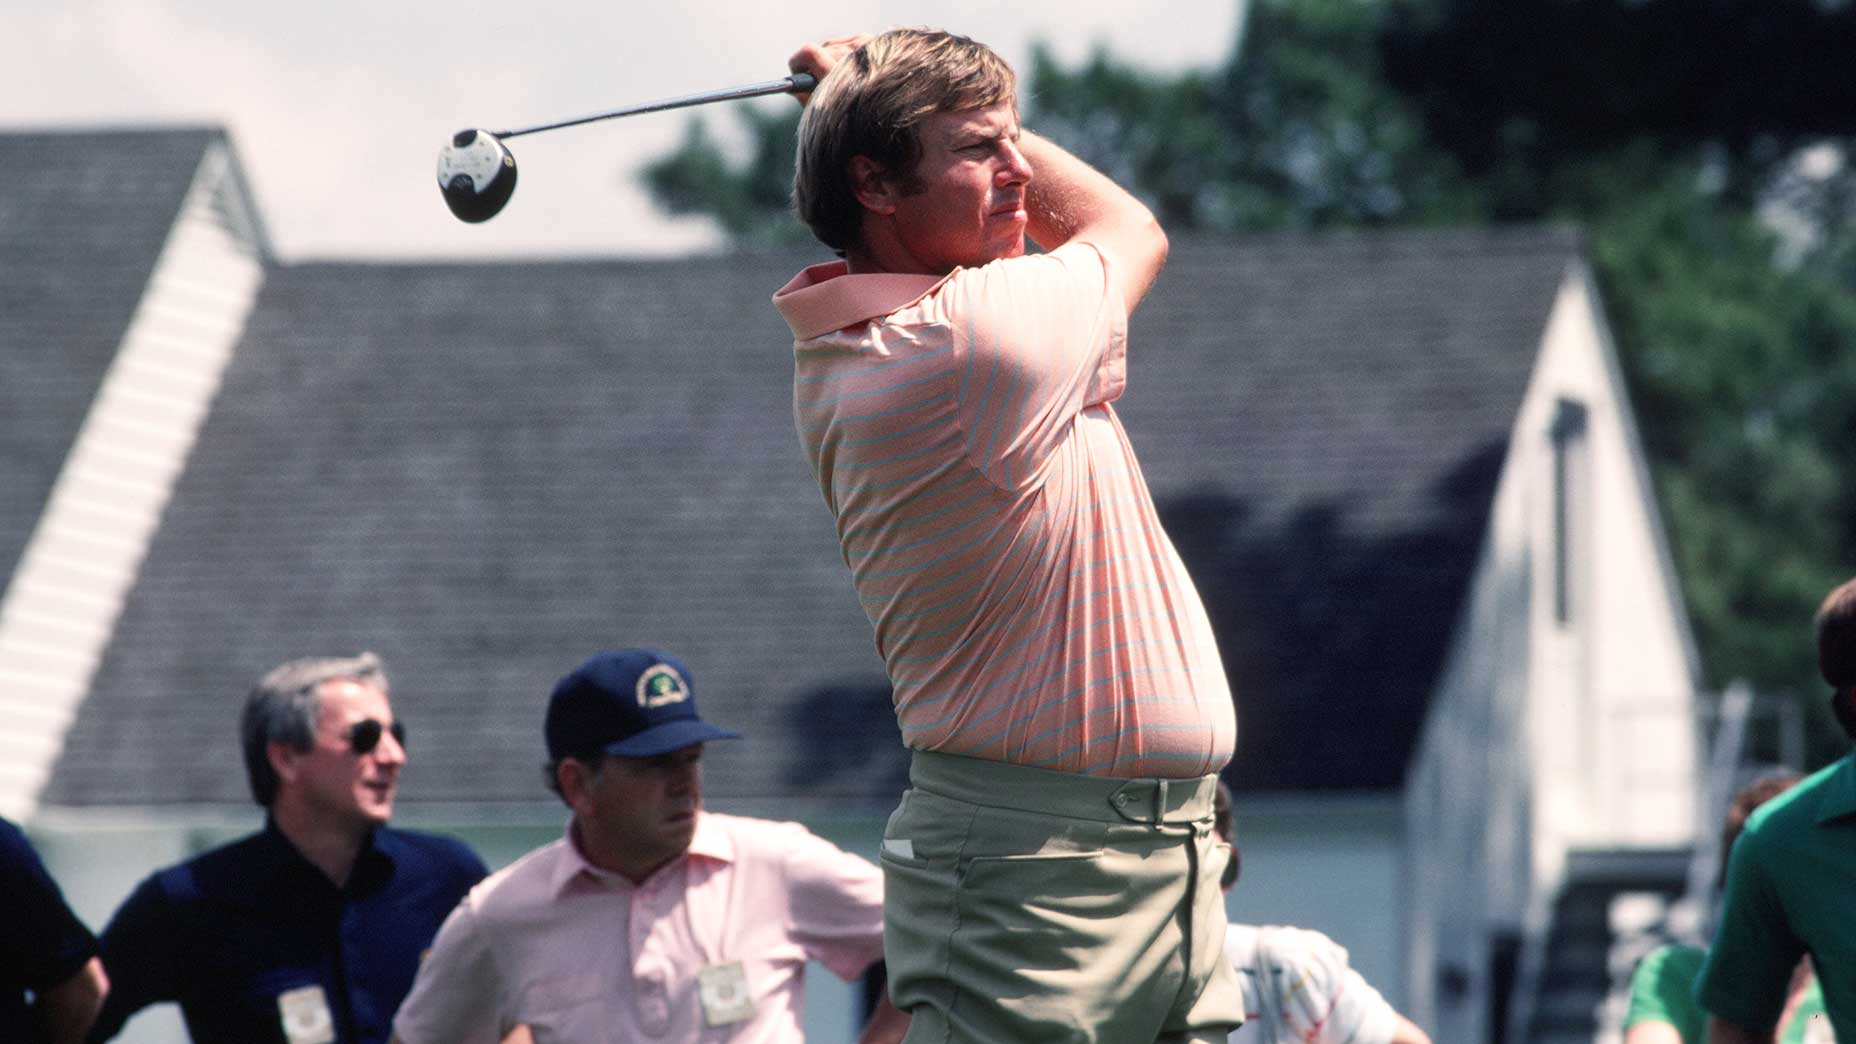 Peter Oosterhuis watches his shot during the 1984 Masters at Augusta National Golf Club in Augusta, Ga.